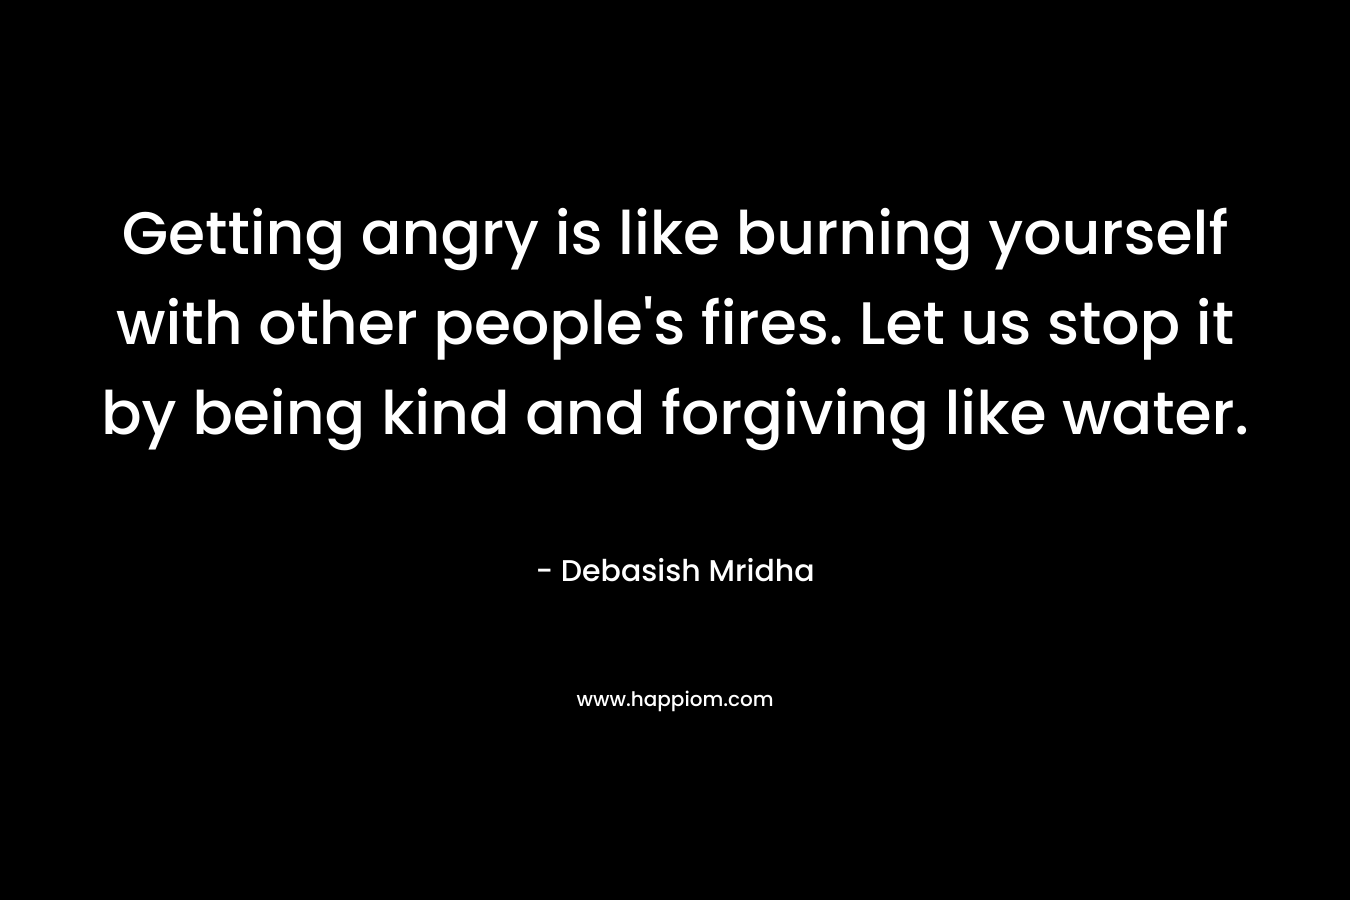 Getting angry is like burning yourself with other people's fires. Let us stop it by being kind and forgiving like water.